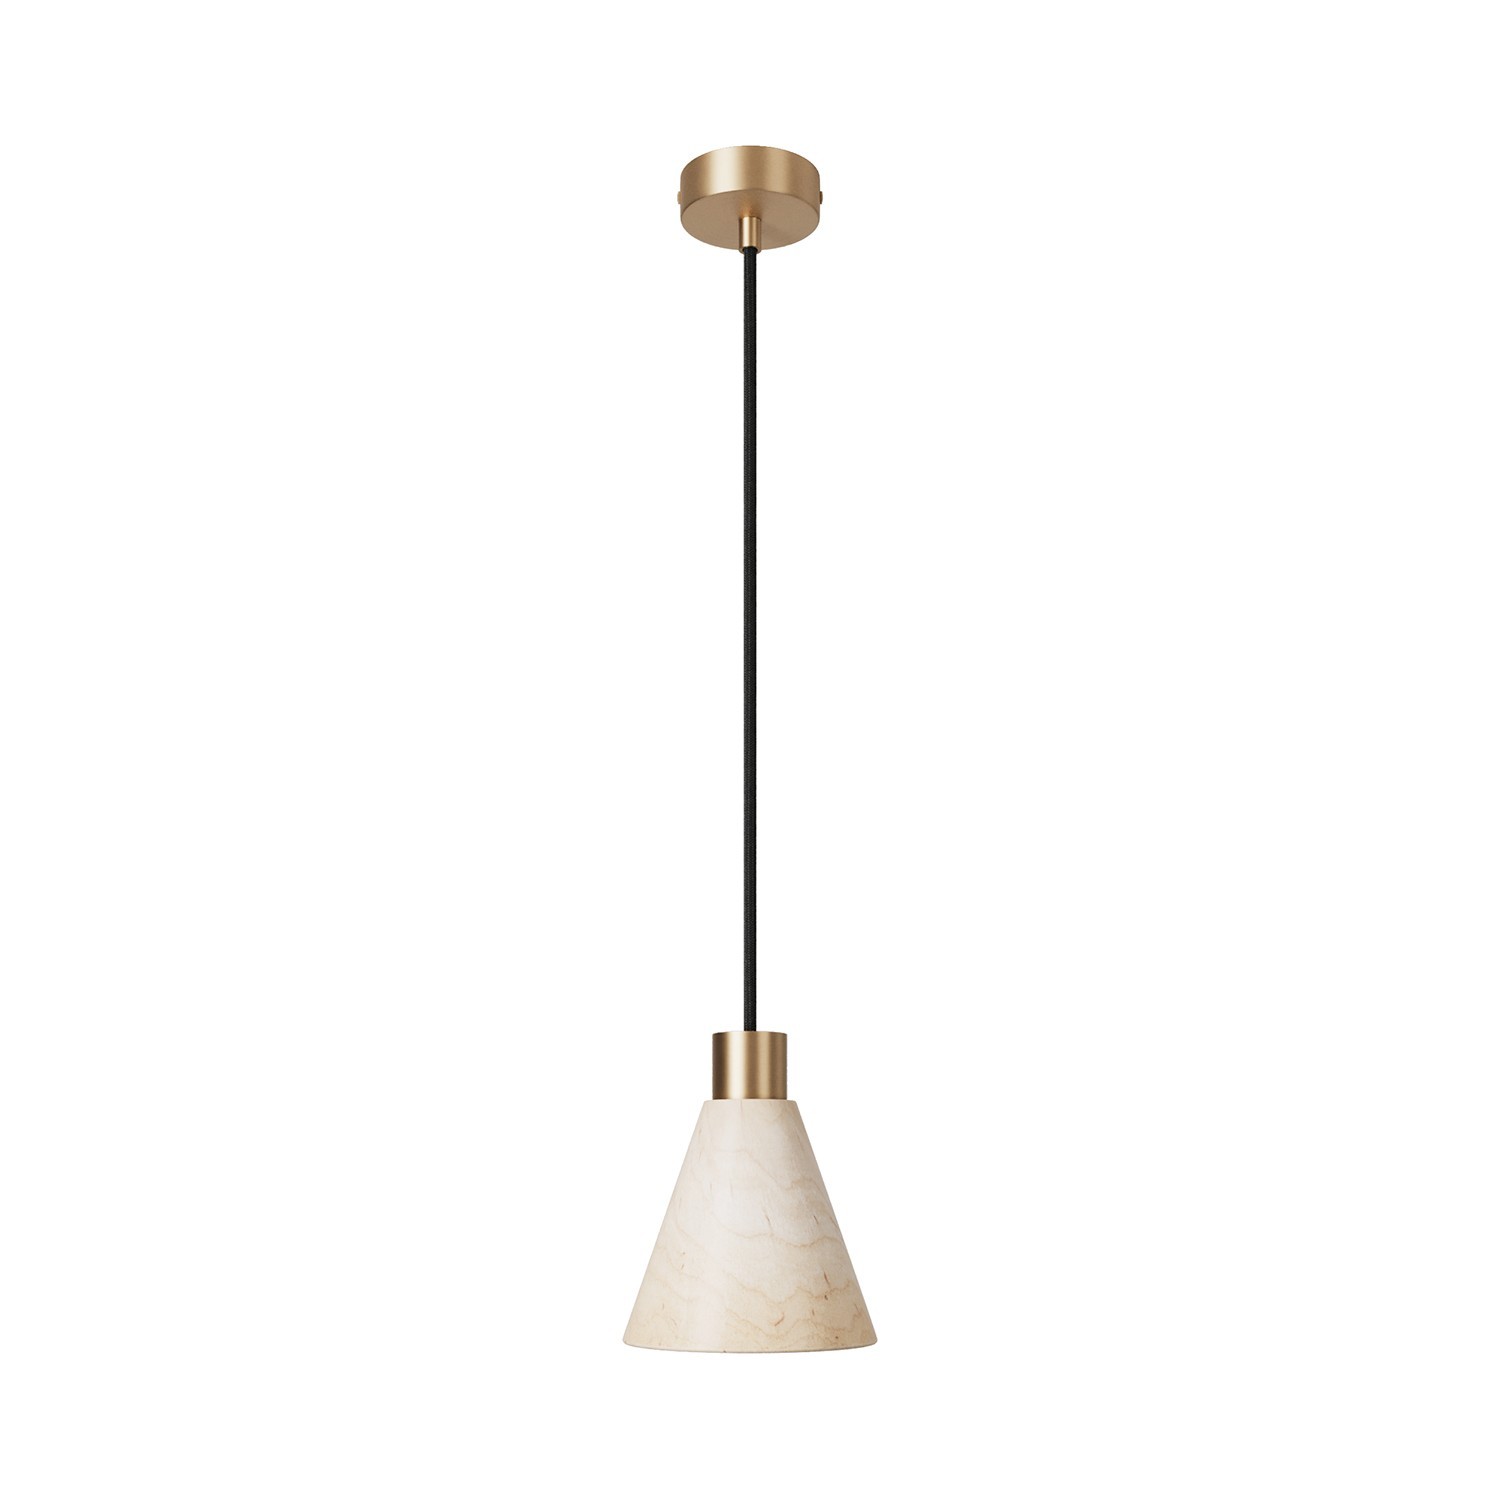 Pendant lamp with wooden conical lampshade